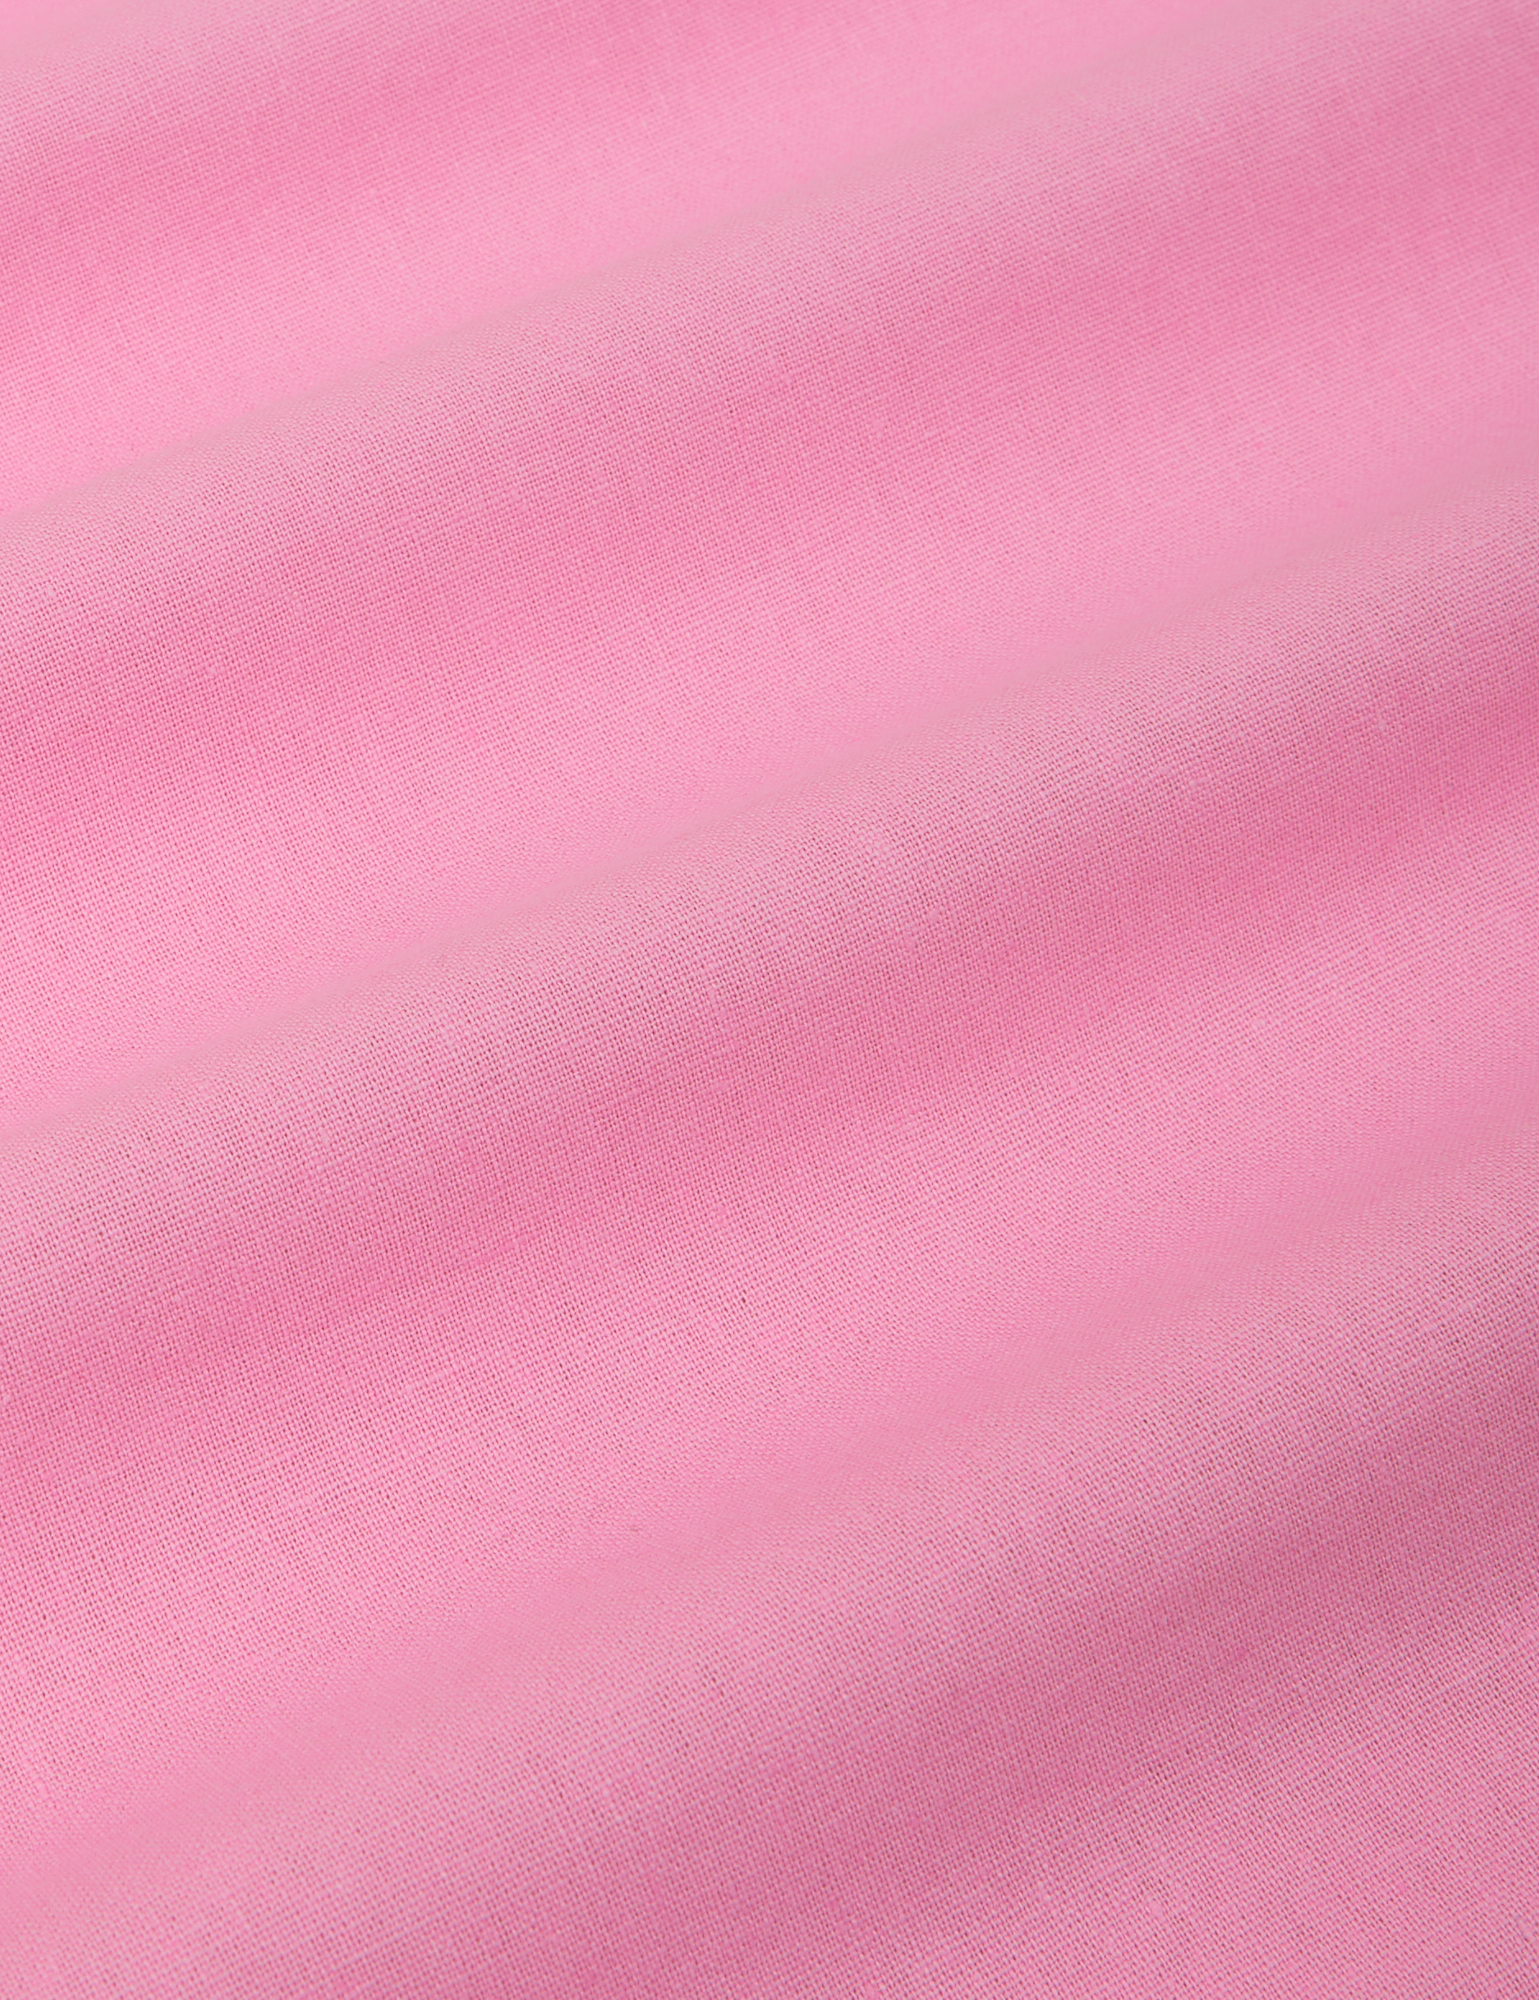 Pantry Button-Up in Bubblegum Pink fabric detail close up